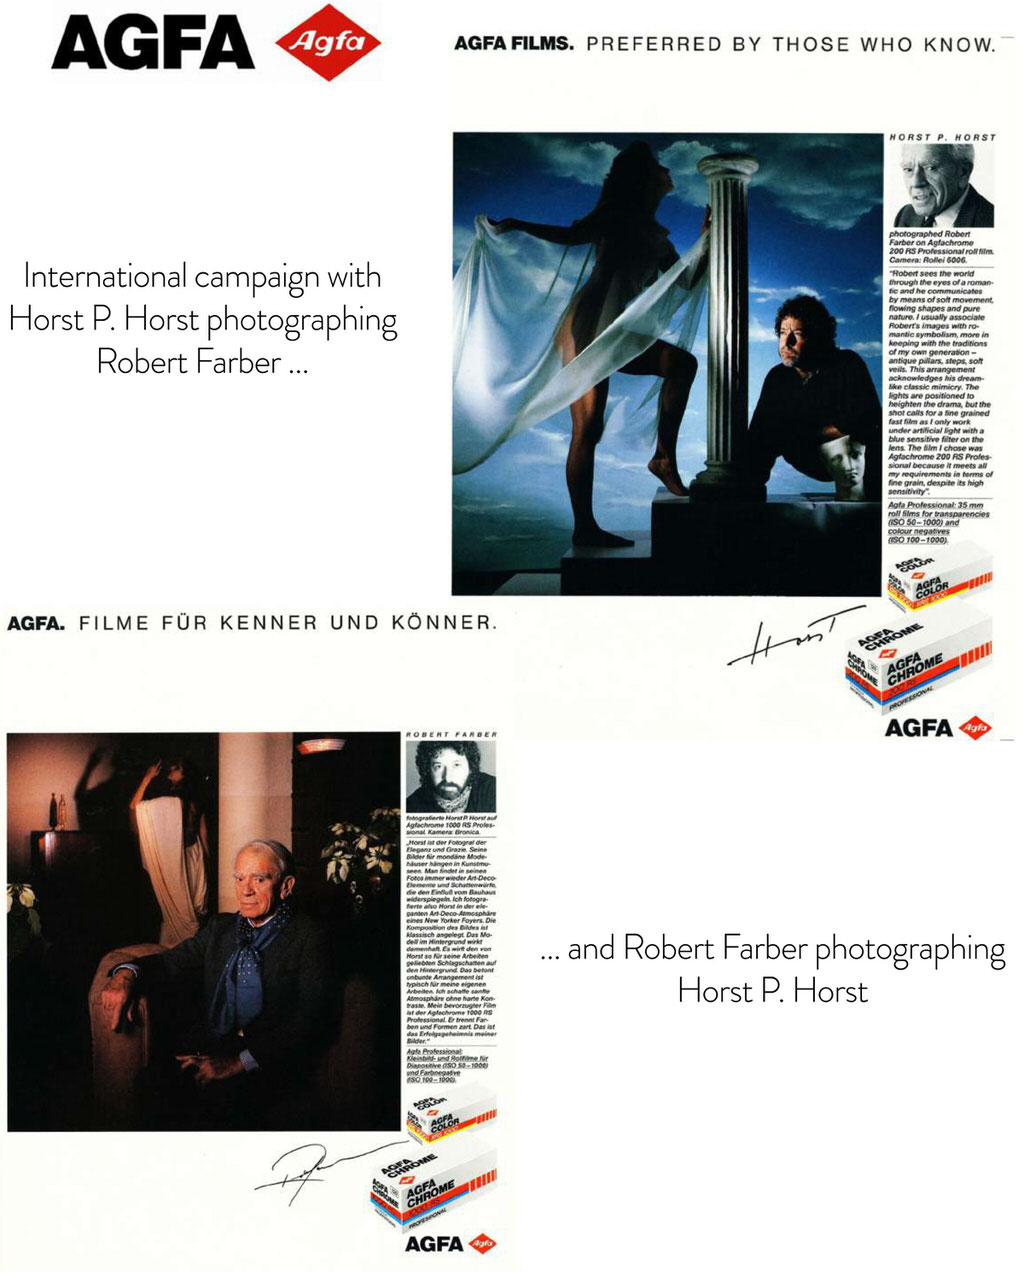 International campaign with Horst P. Horst photographing Robert Farber, and Robert Farber photographing Horst P. Horst.